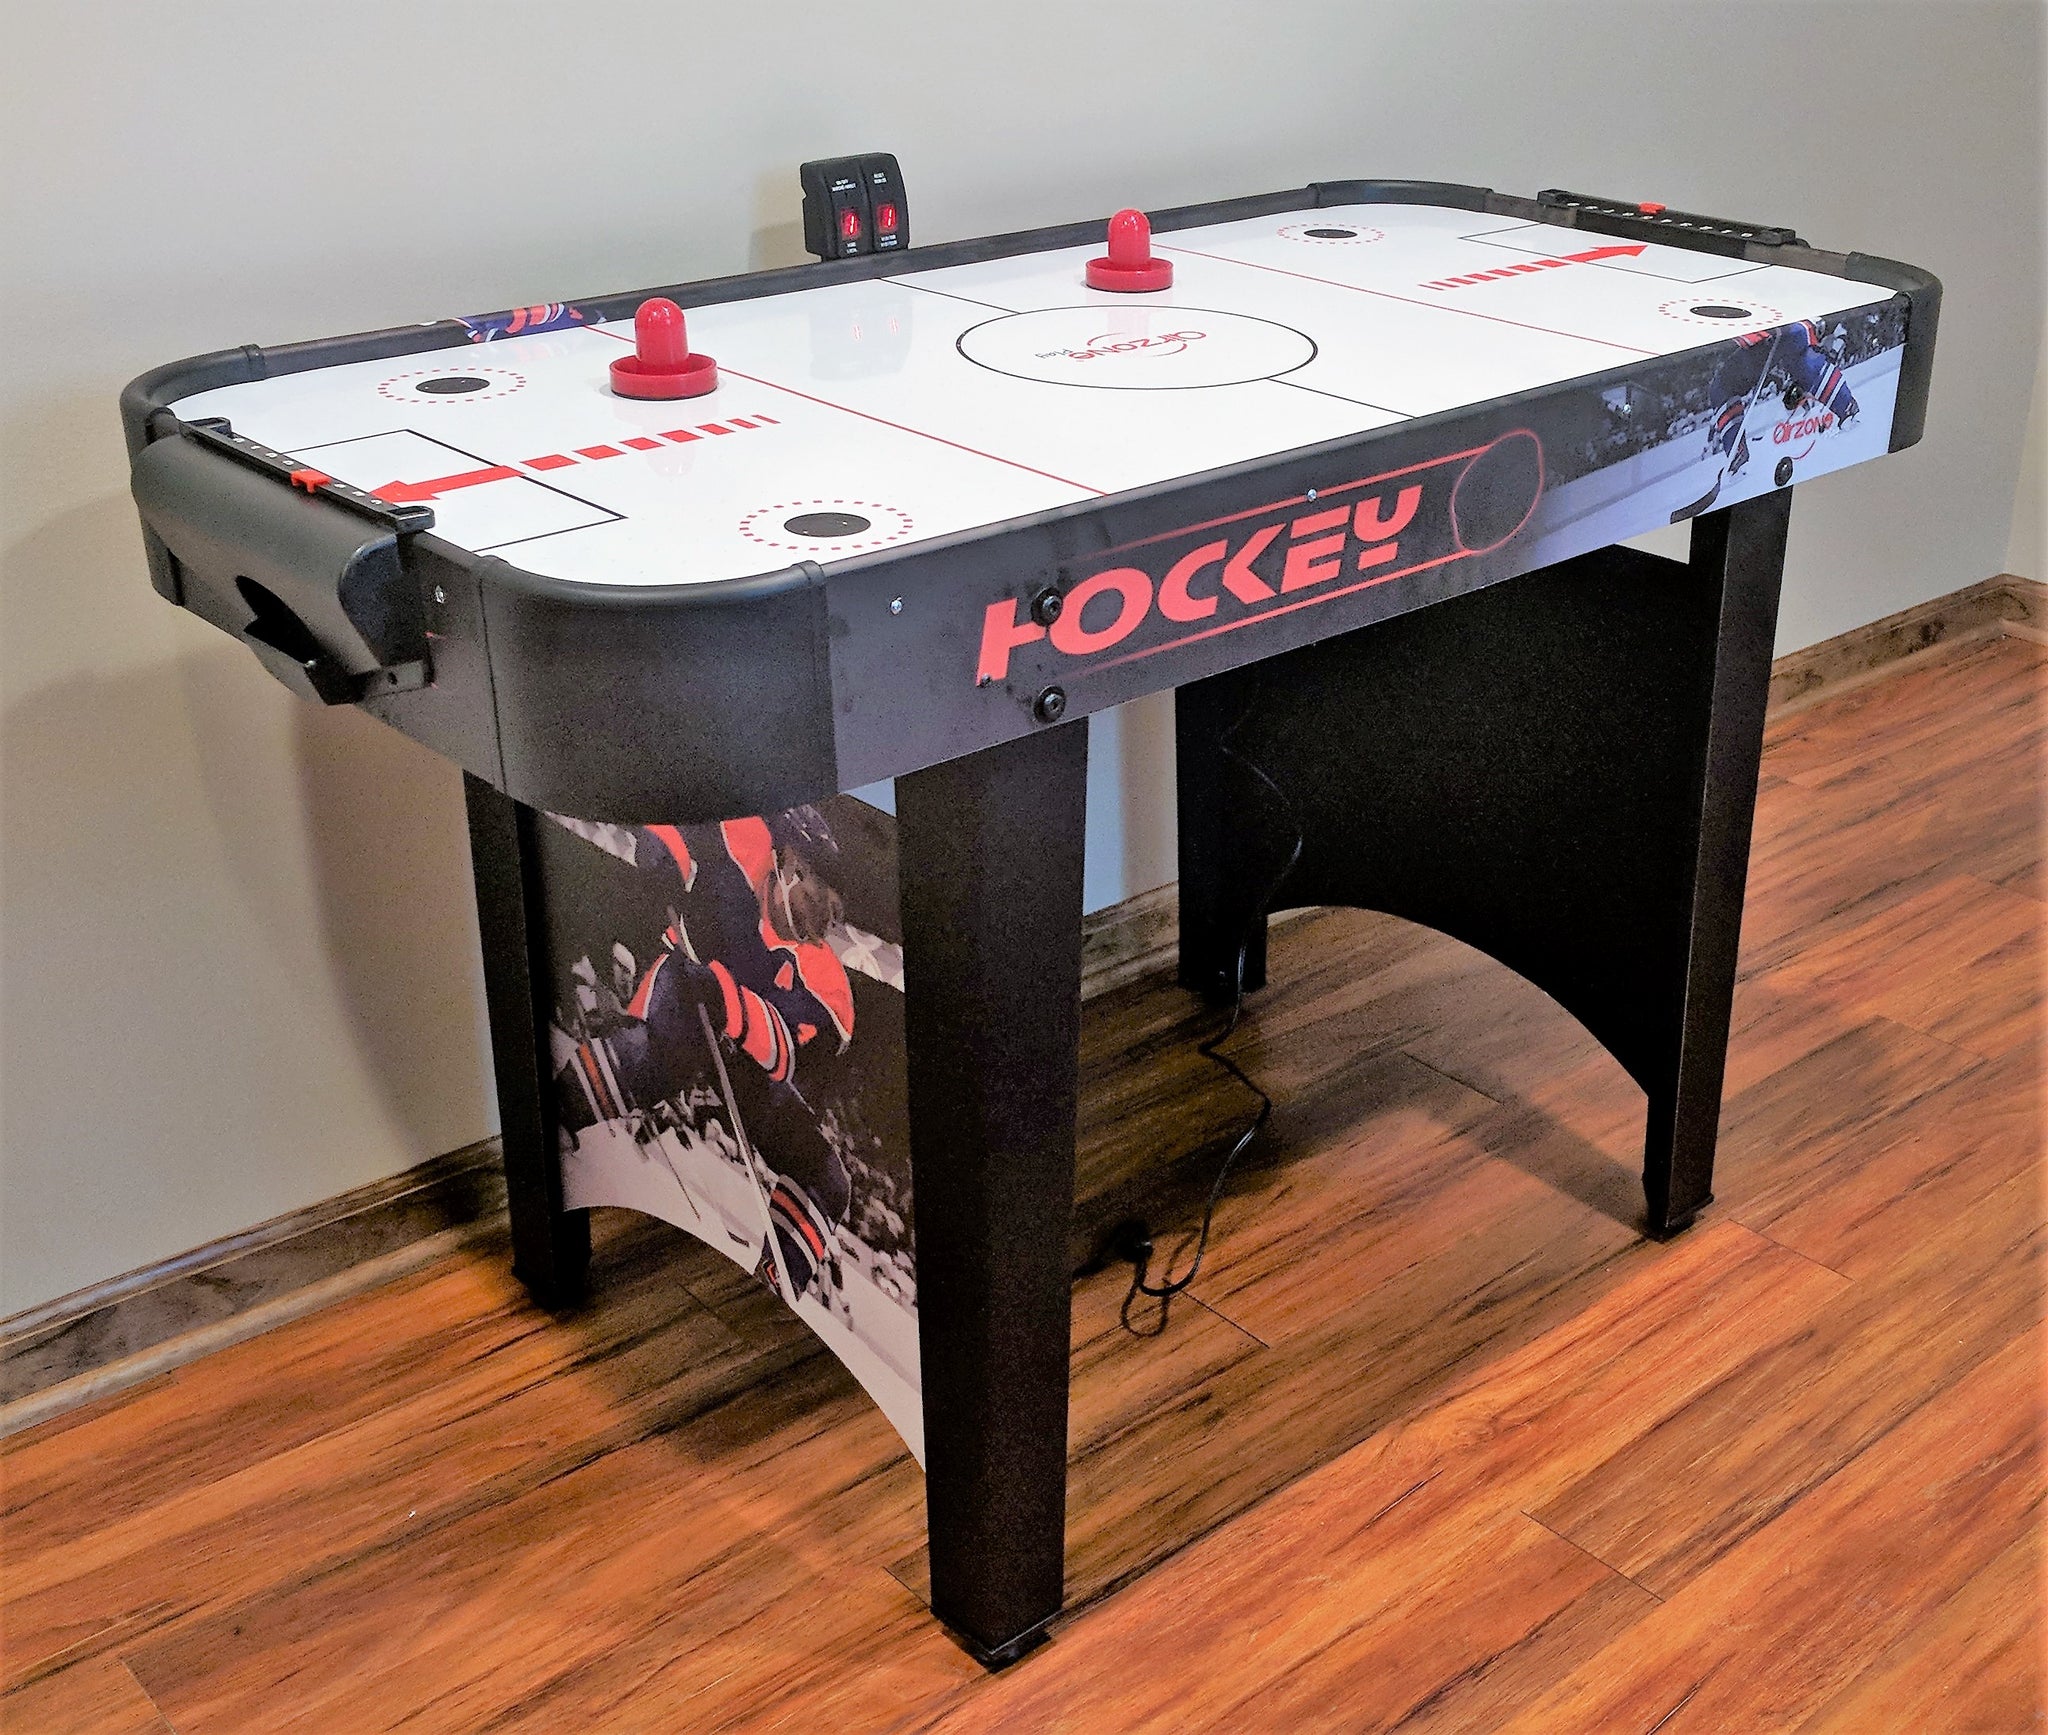 AirZone Play 48 Air Hockey Table w/ LED Scoring – AirZone Direct